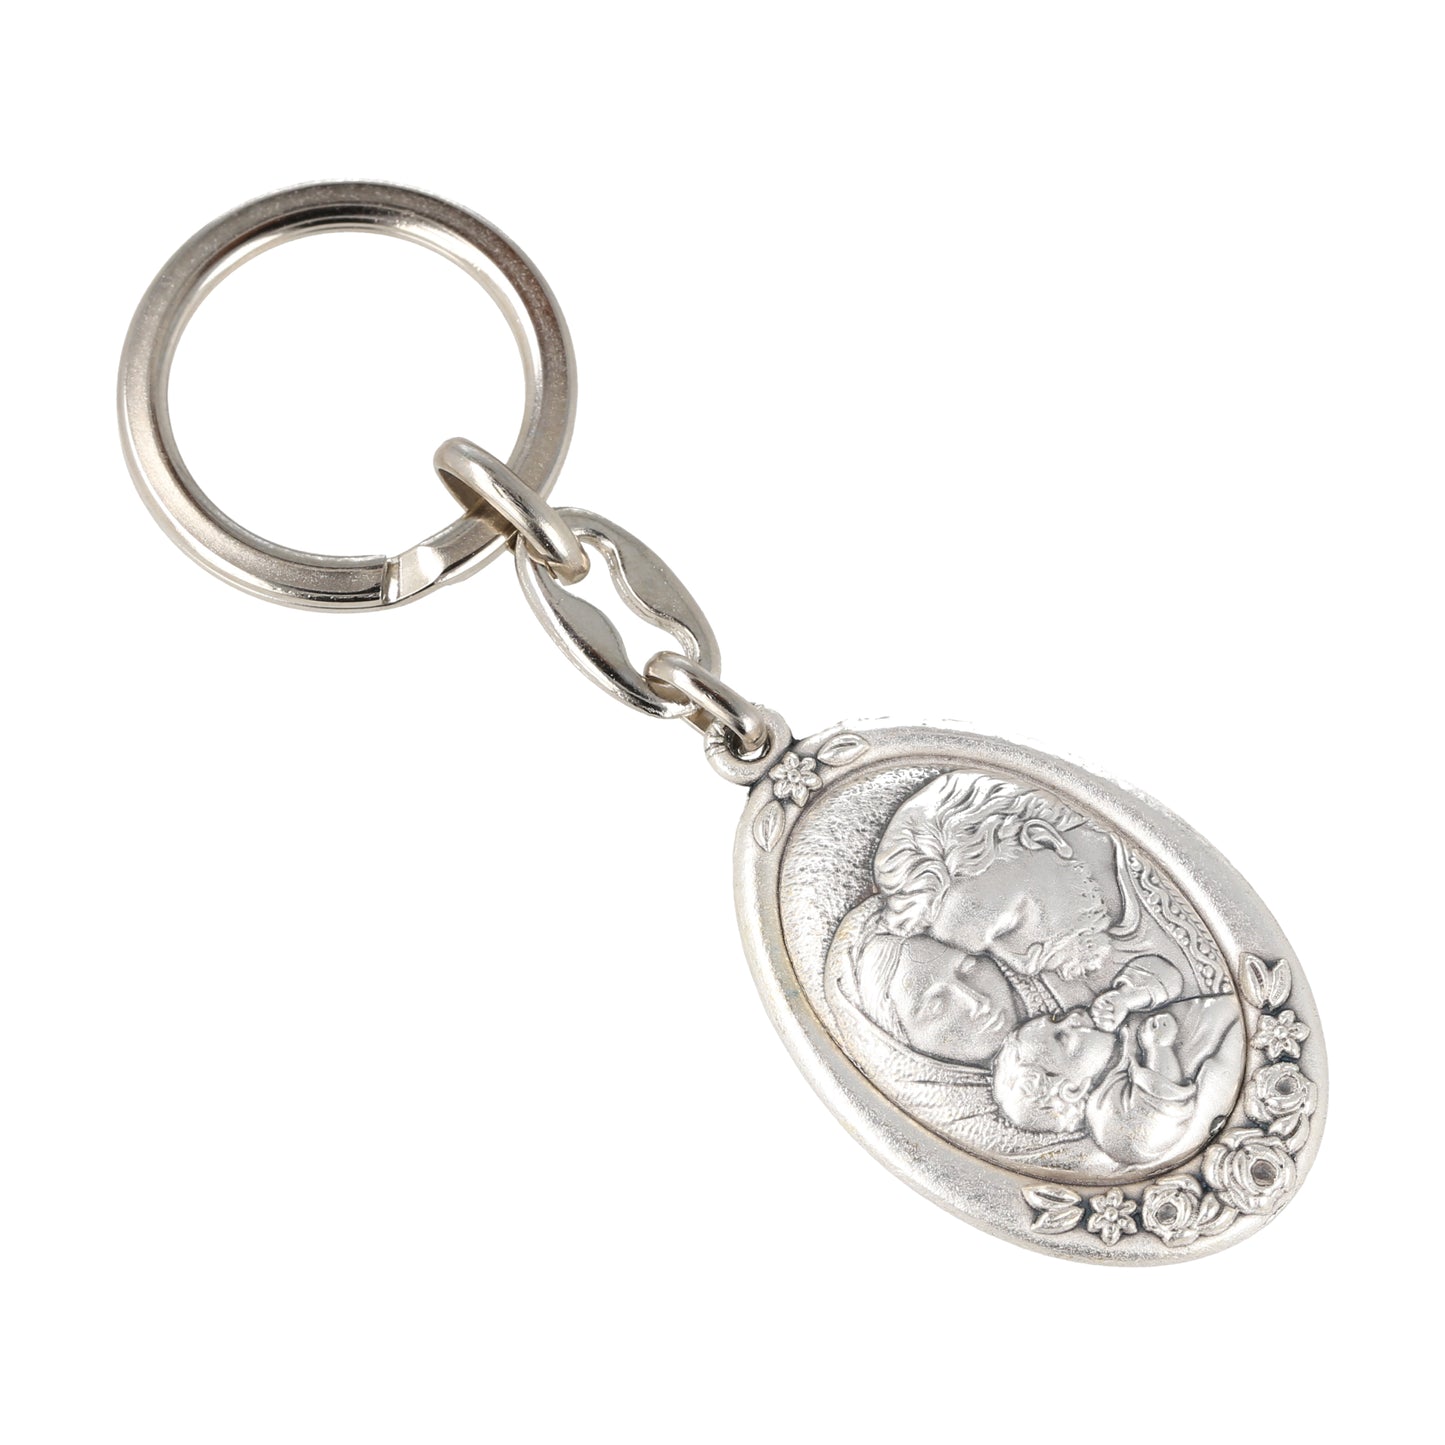 Keychain Holy Family Oval Silver With Flowers. Souvenirs from Italy